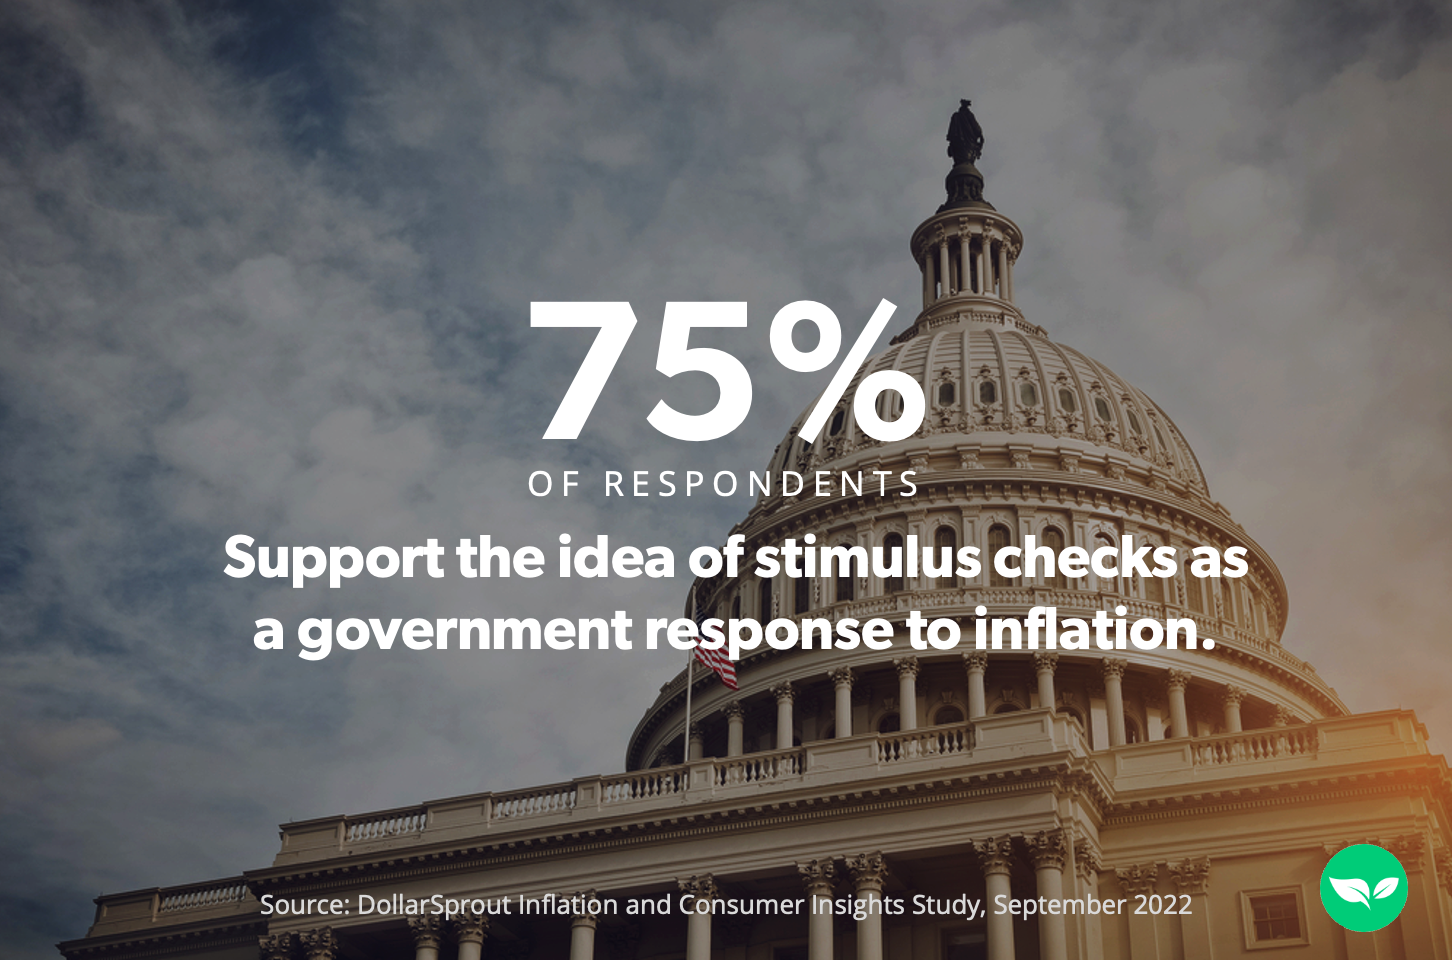 75% of Americans support the idea of stimulus checks as a government response to inflation.